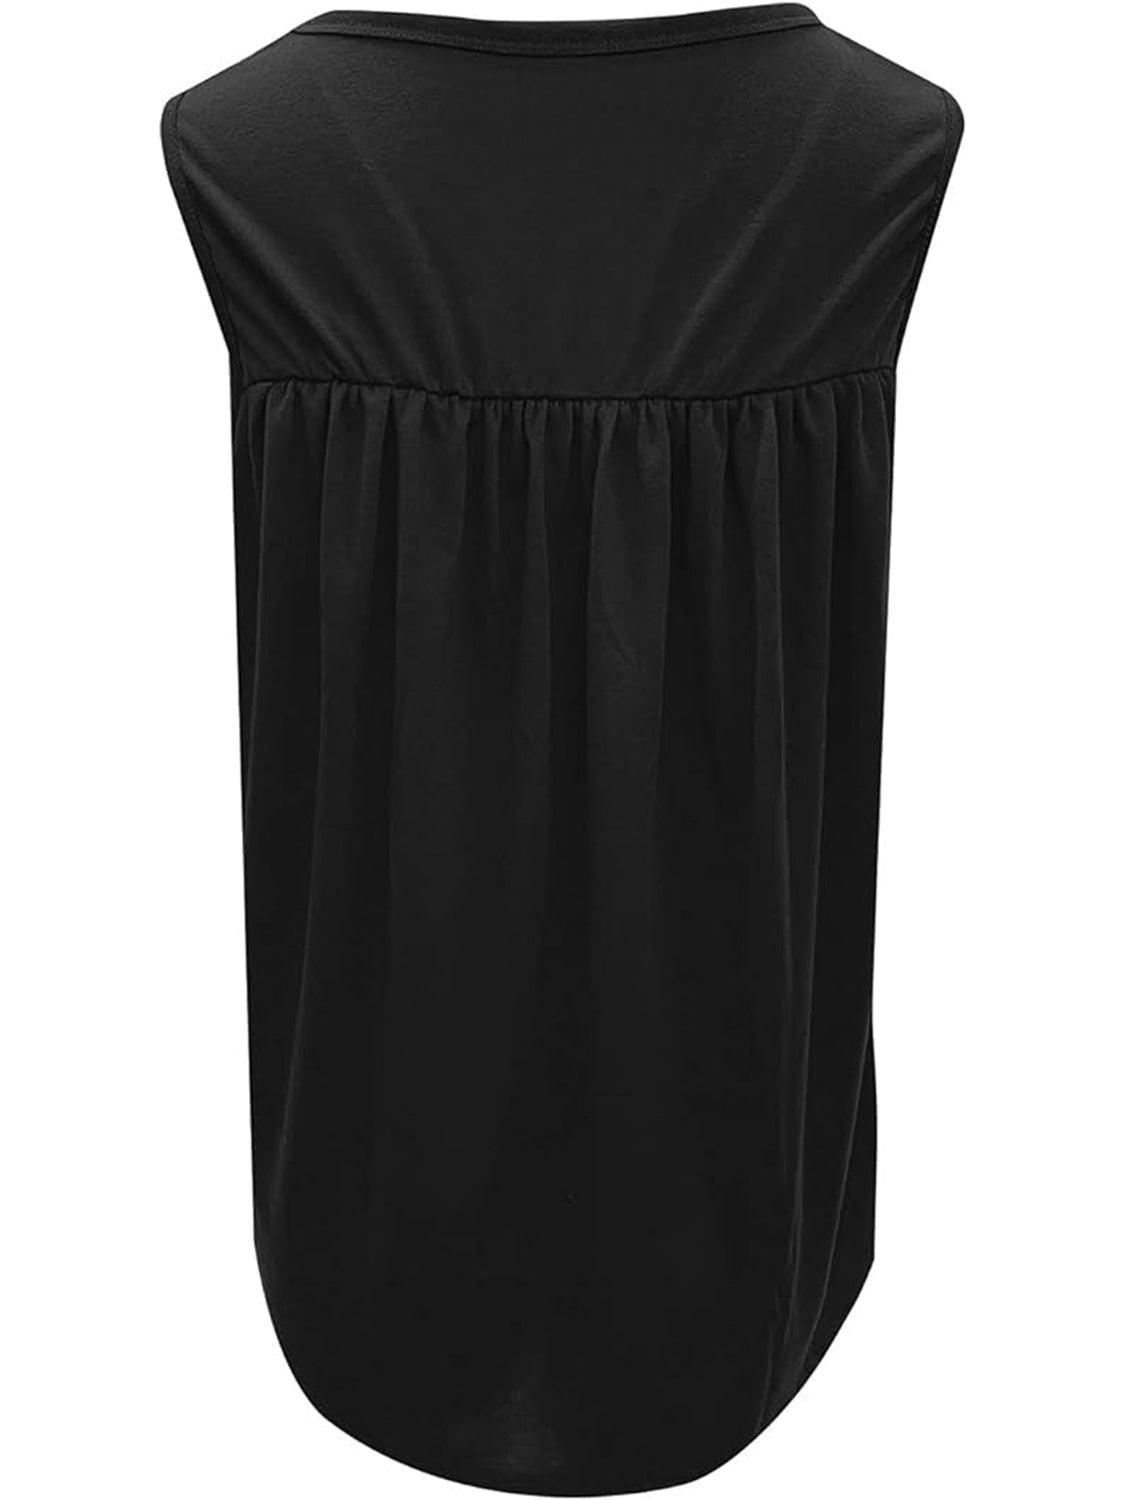 a women's black top with a gathered neckline